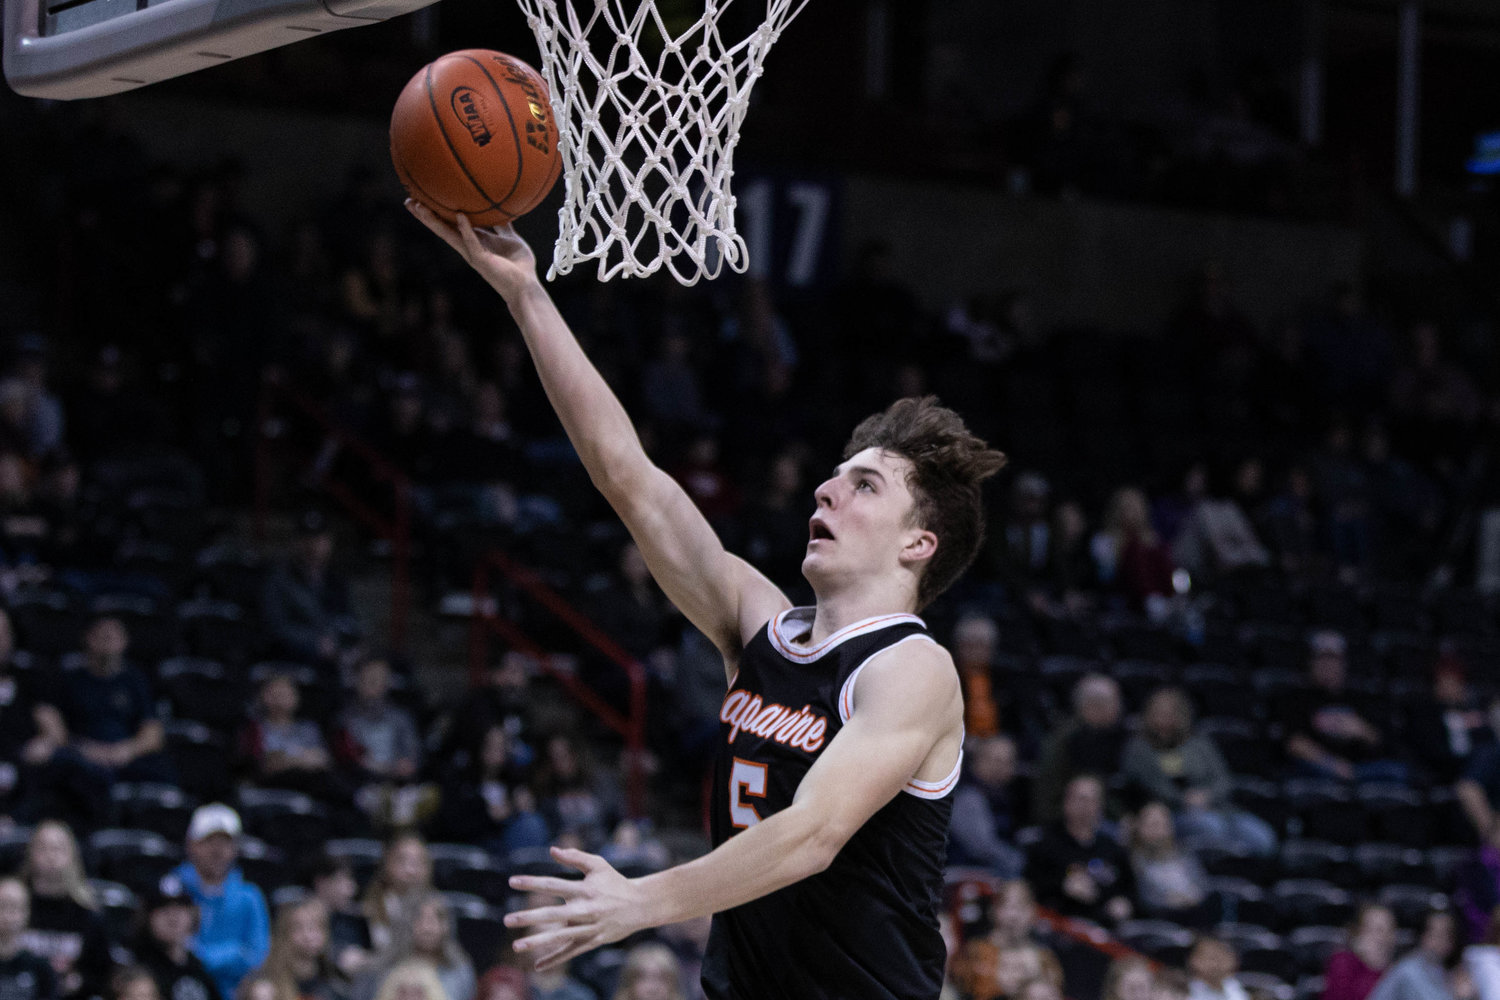 Napavine forward Karsen Denault rises for a transition layup against Morton-White Pass in a loser-out 2B state consolation game at Spokane Arena March 3.